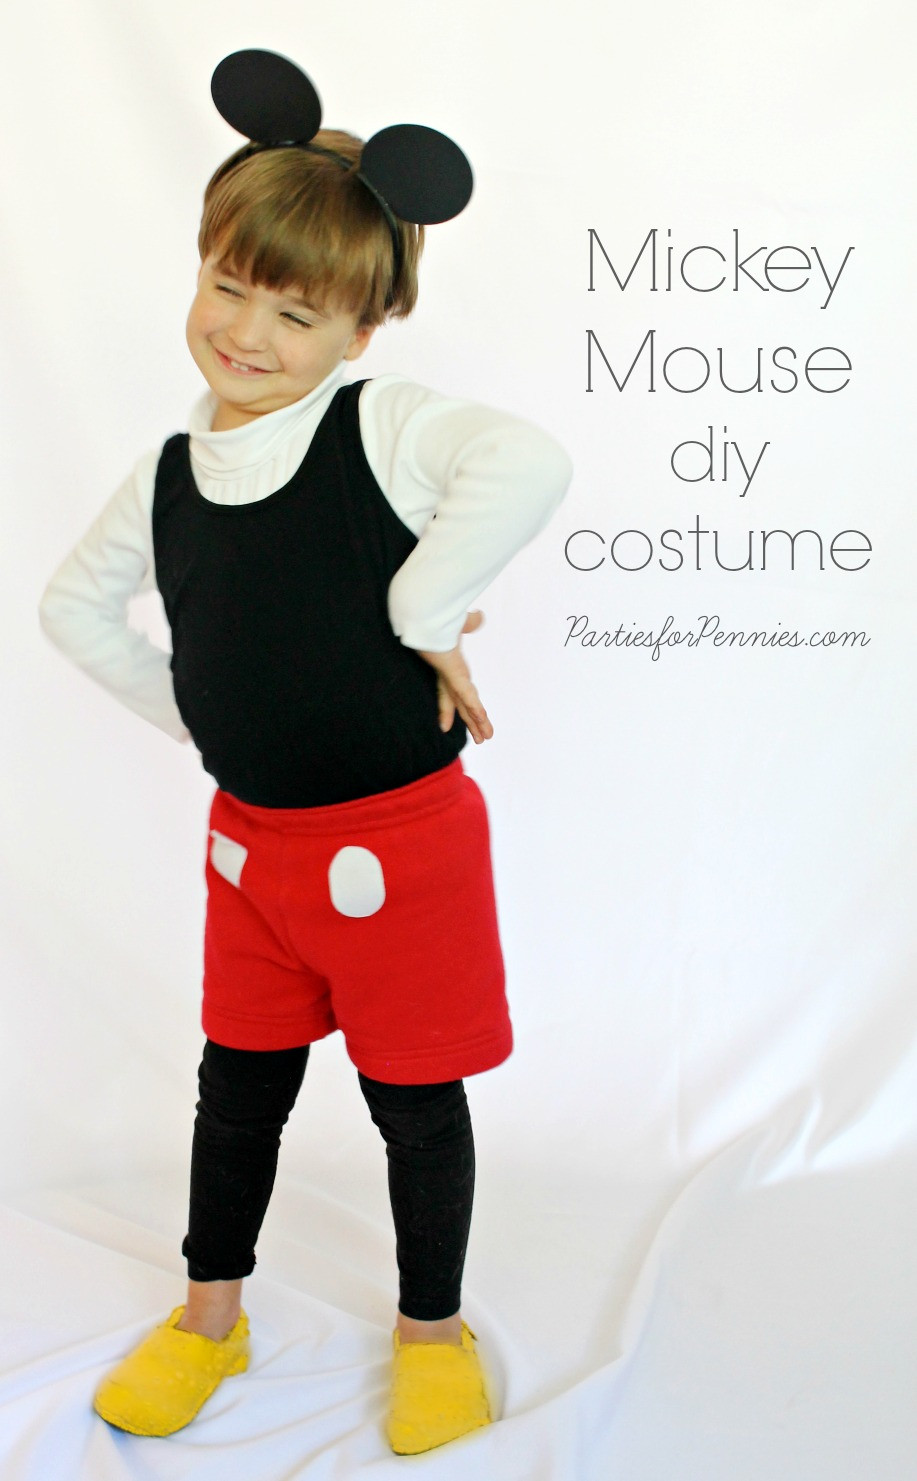 DIY Mouse Costumes
 DIY Halloween Costumes Parties for Pennies